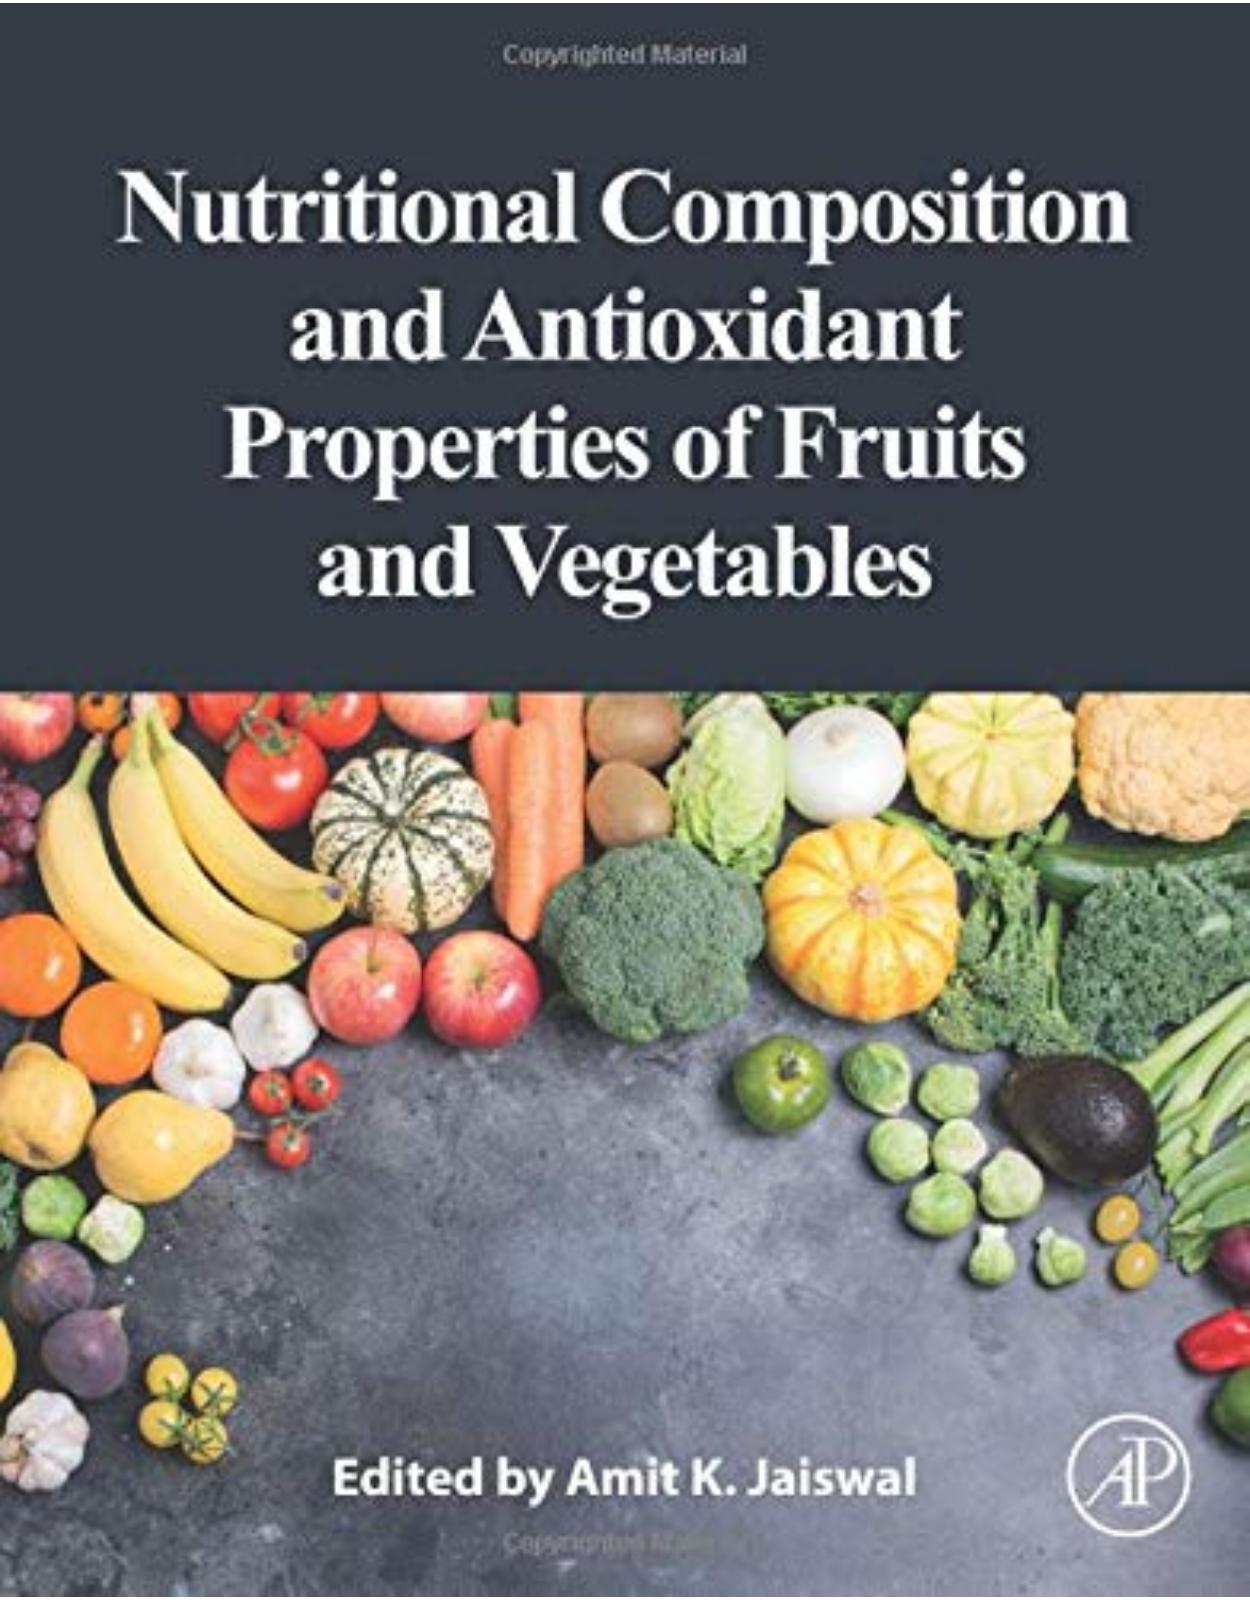 Nutritional Composition and Antioxidant Properties of Fruits and Vegetables 